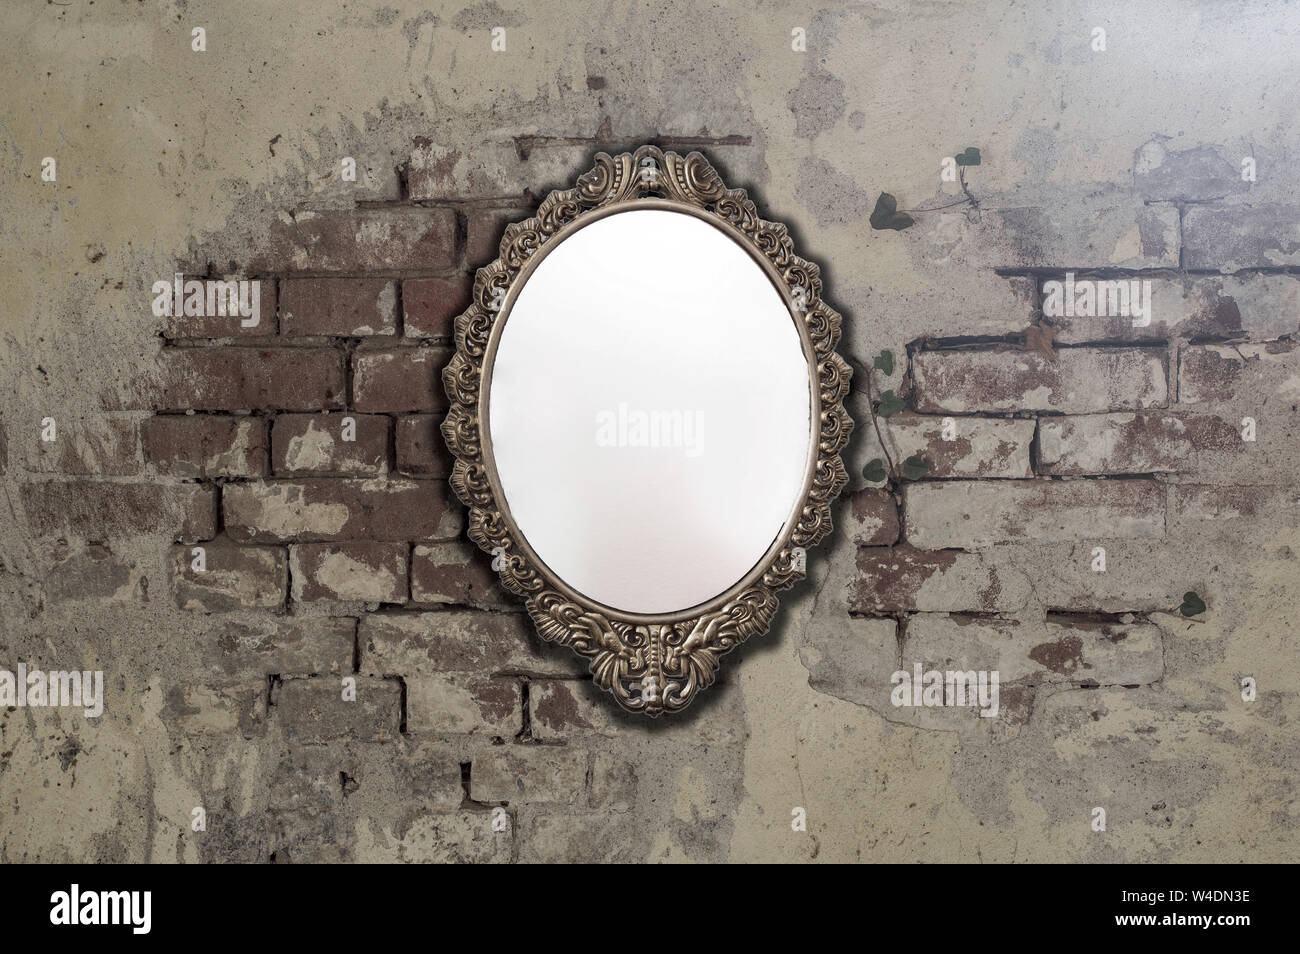 Vintage antique mirror on old brick wall background texture Stock Photo